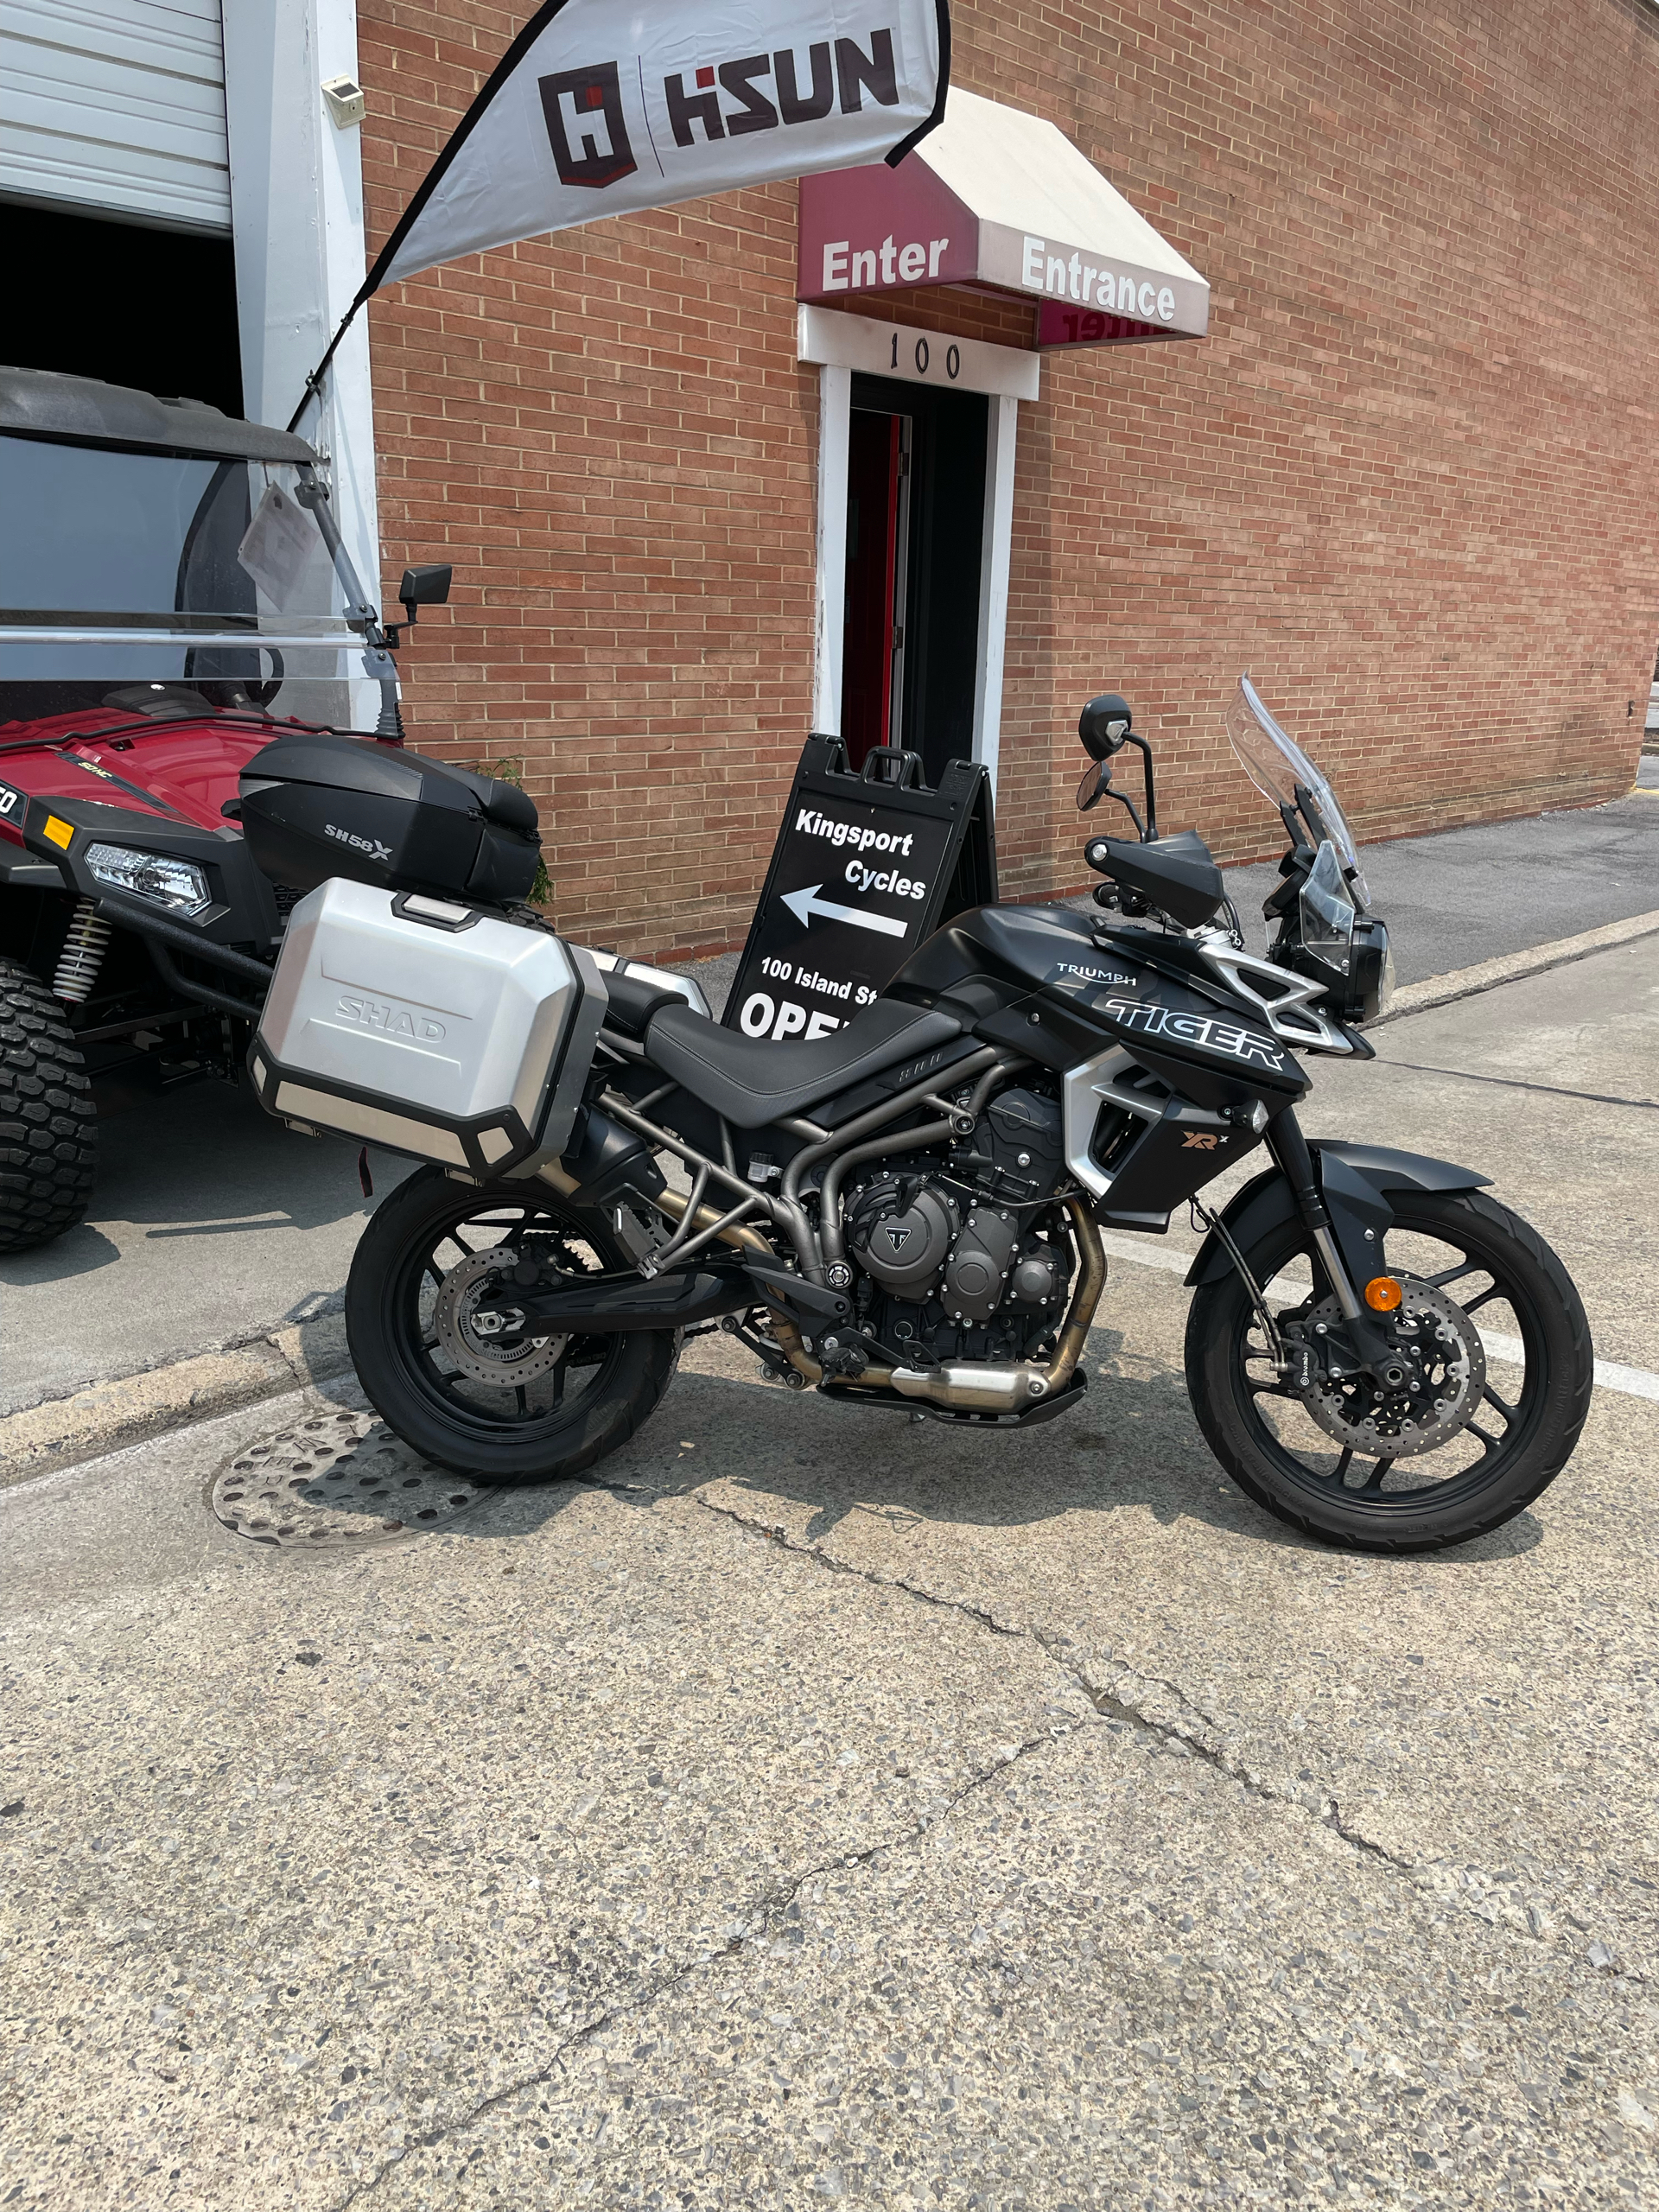 2018 Triumph Tiger 800 XRx in Kingsport, Tennessee - Photo 3